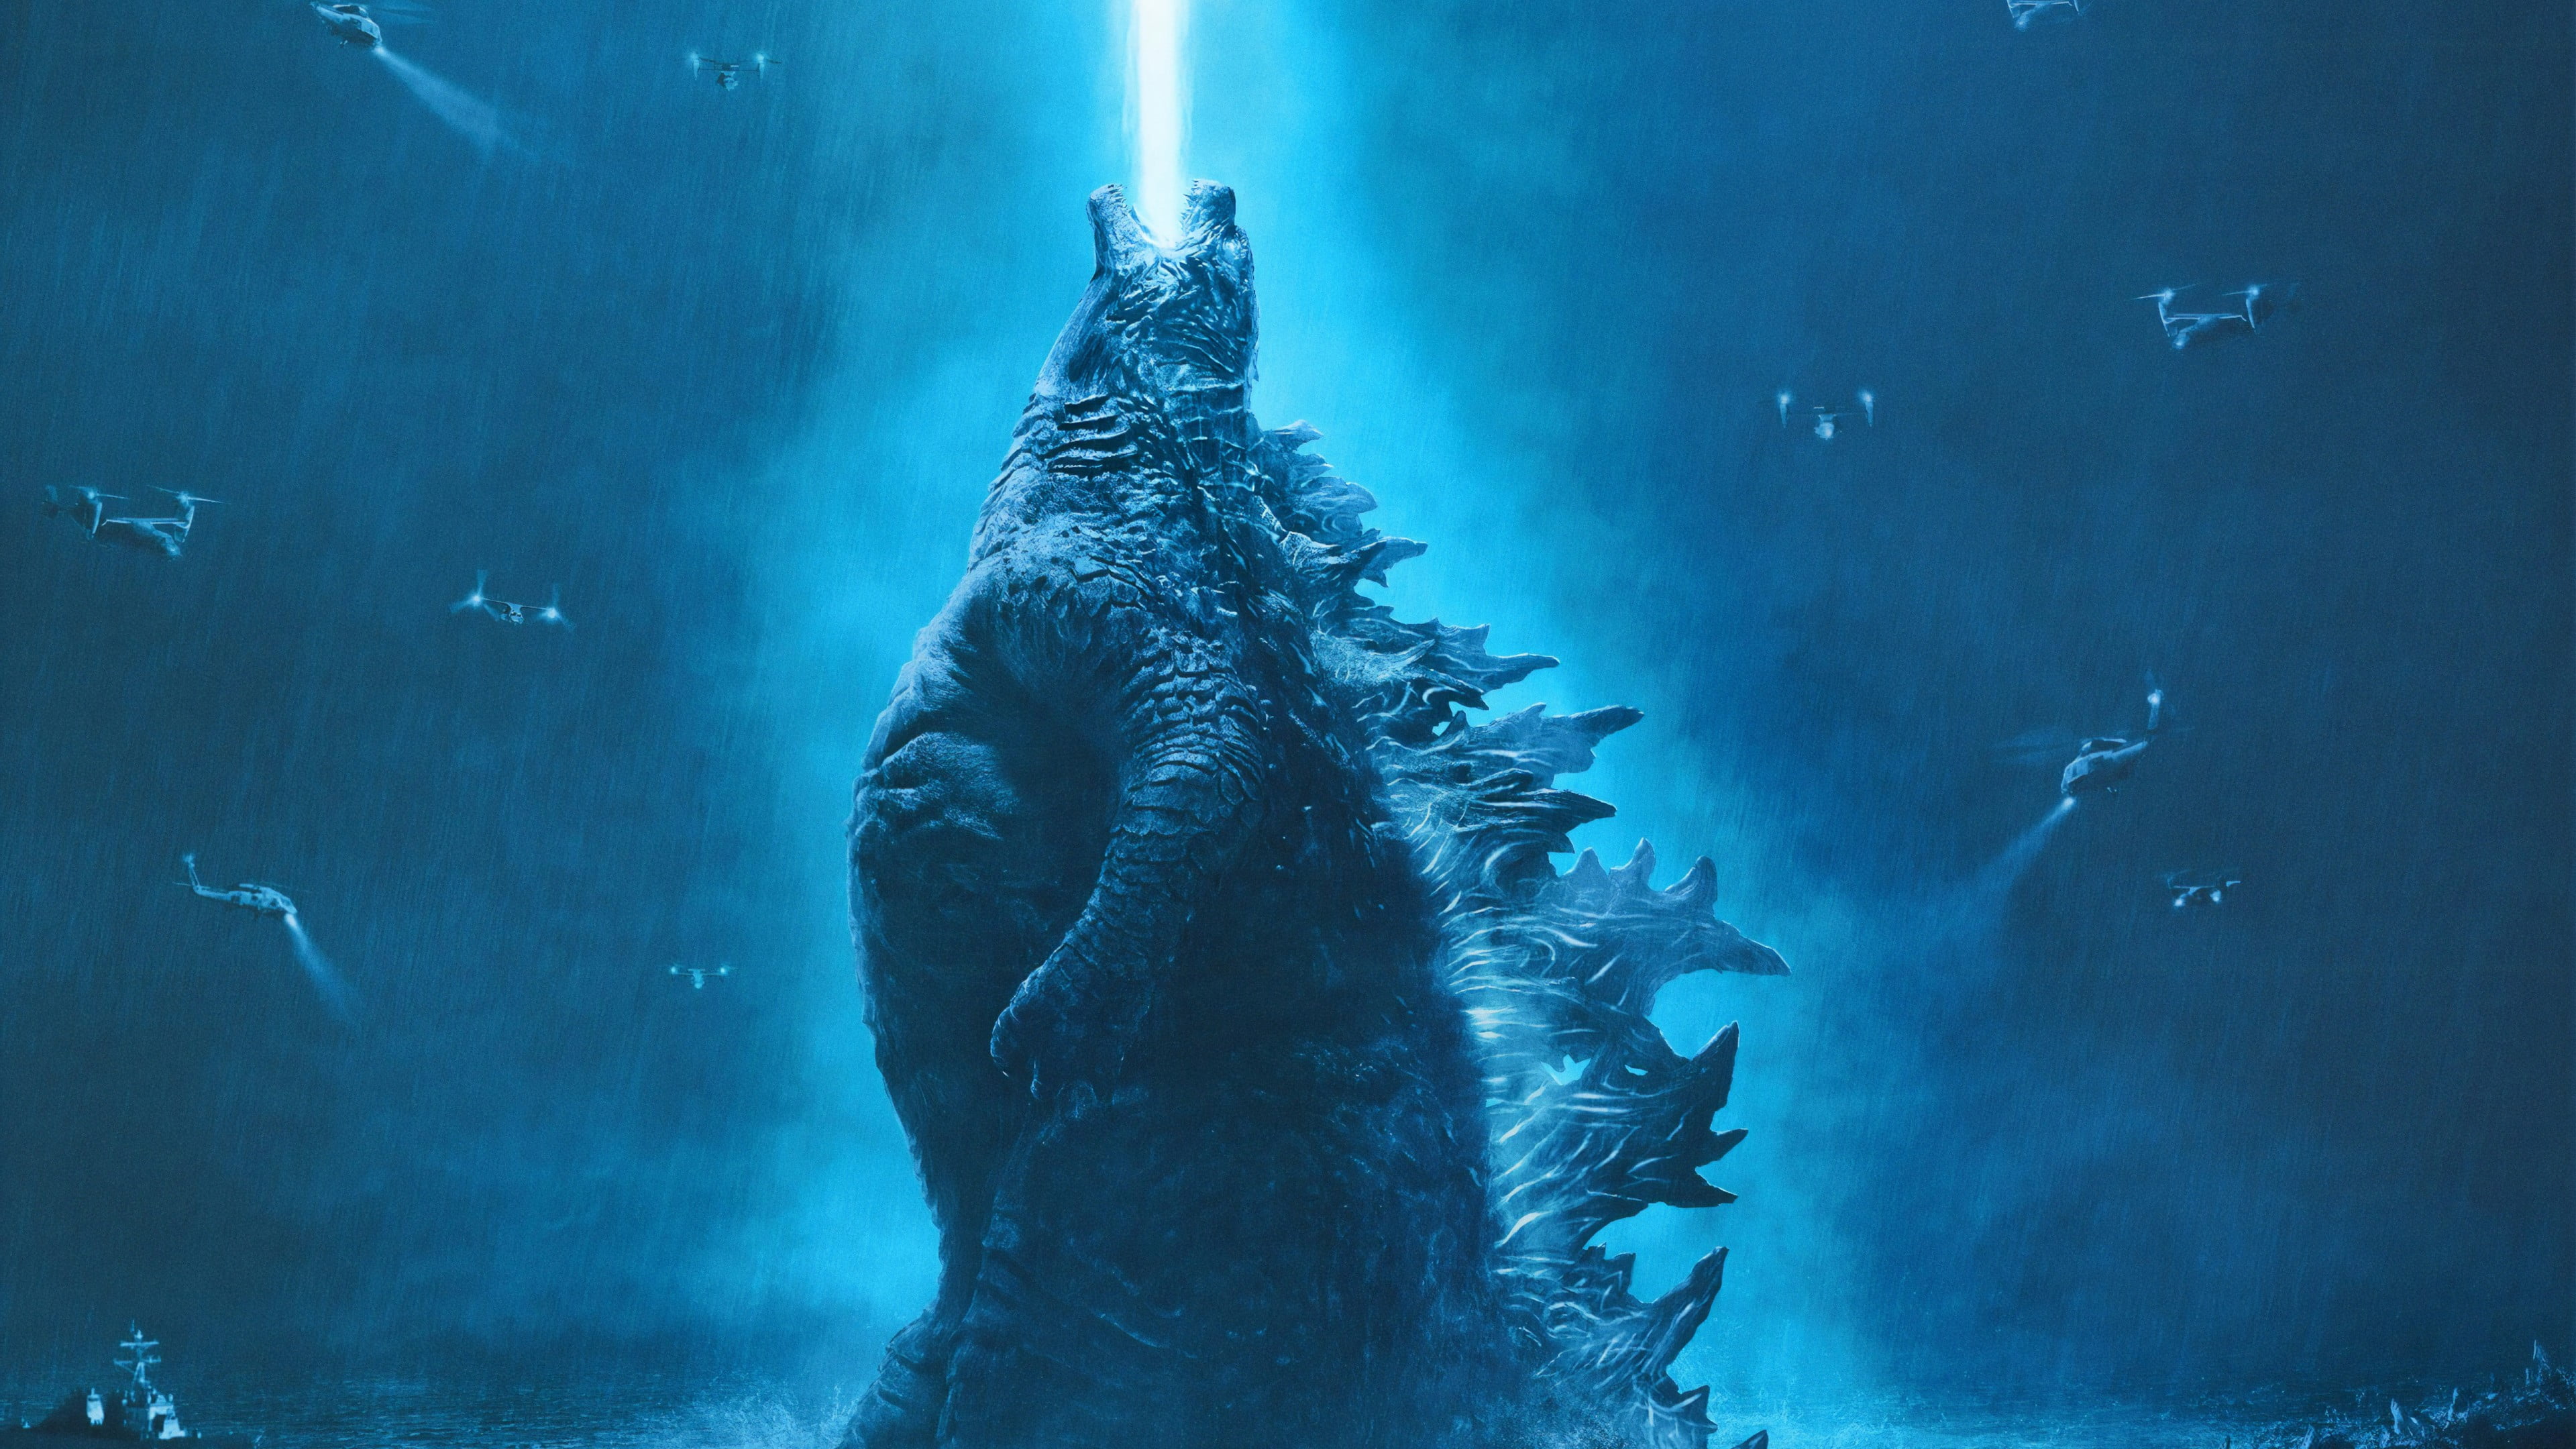 Godzilla: King of the Monsters, movies, blue, 2019 (Year), creature